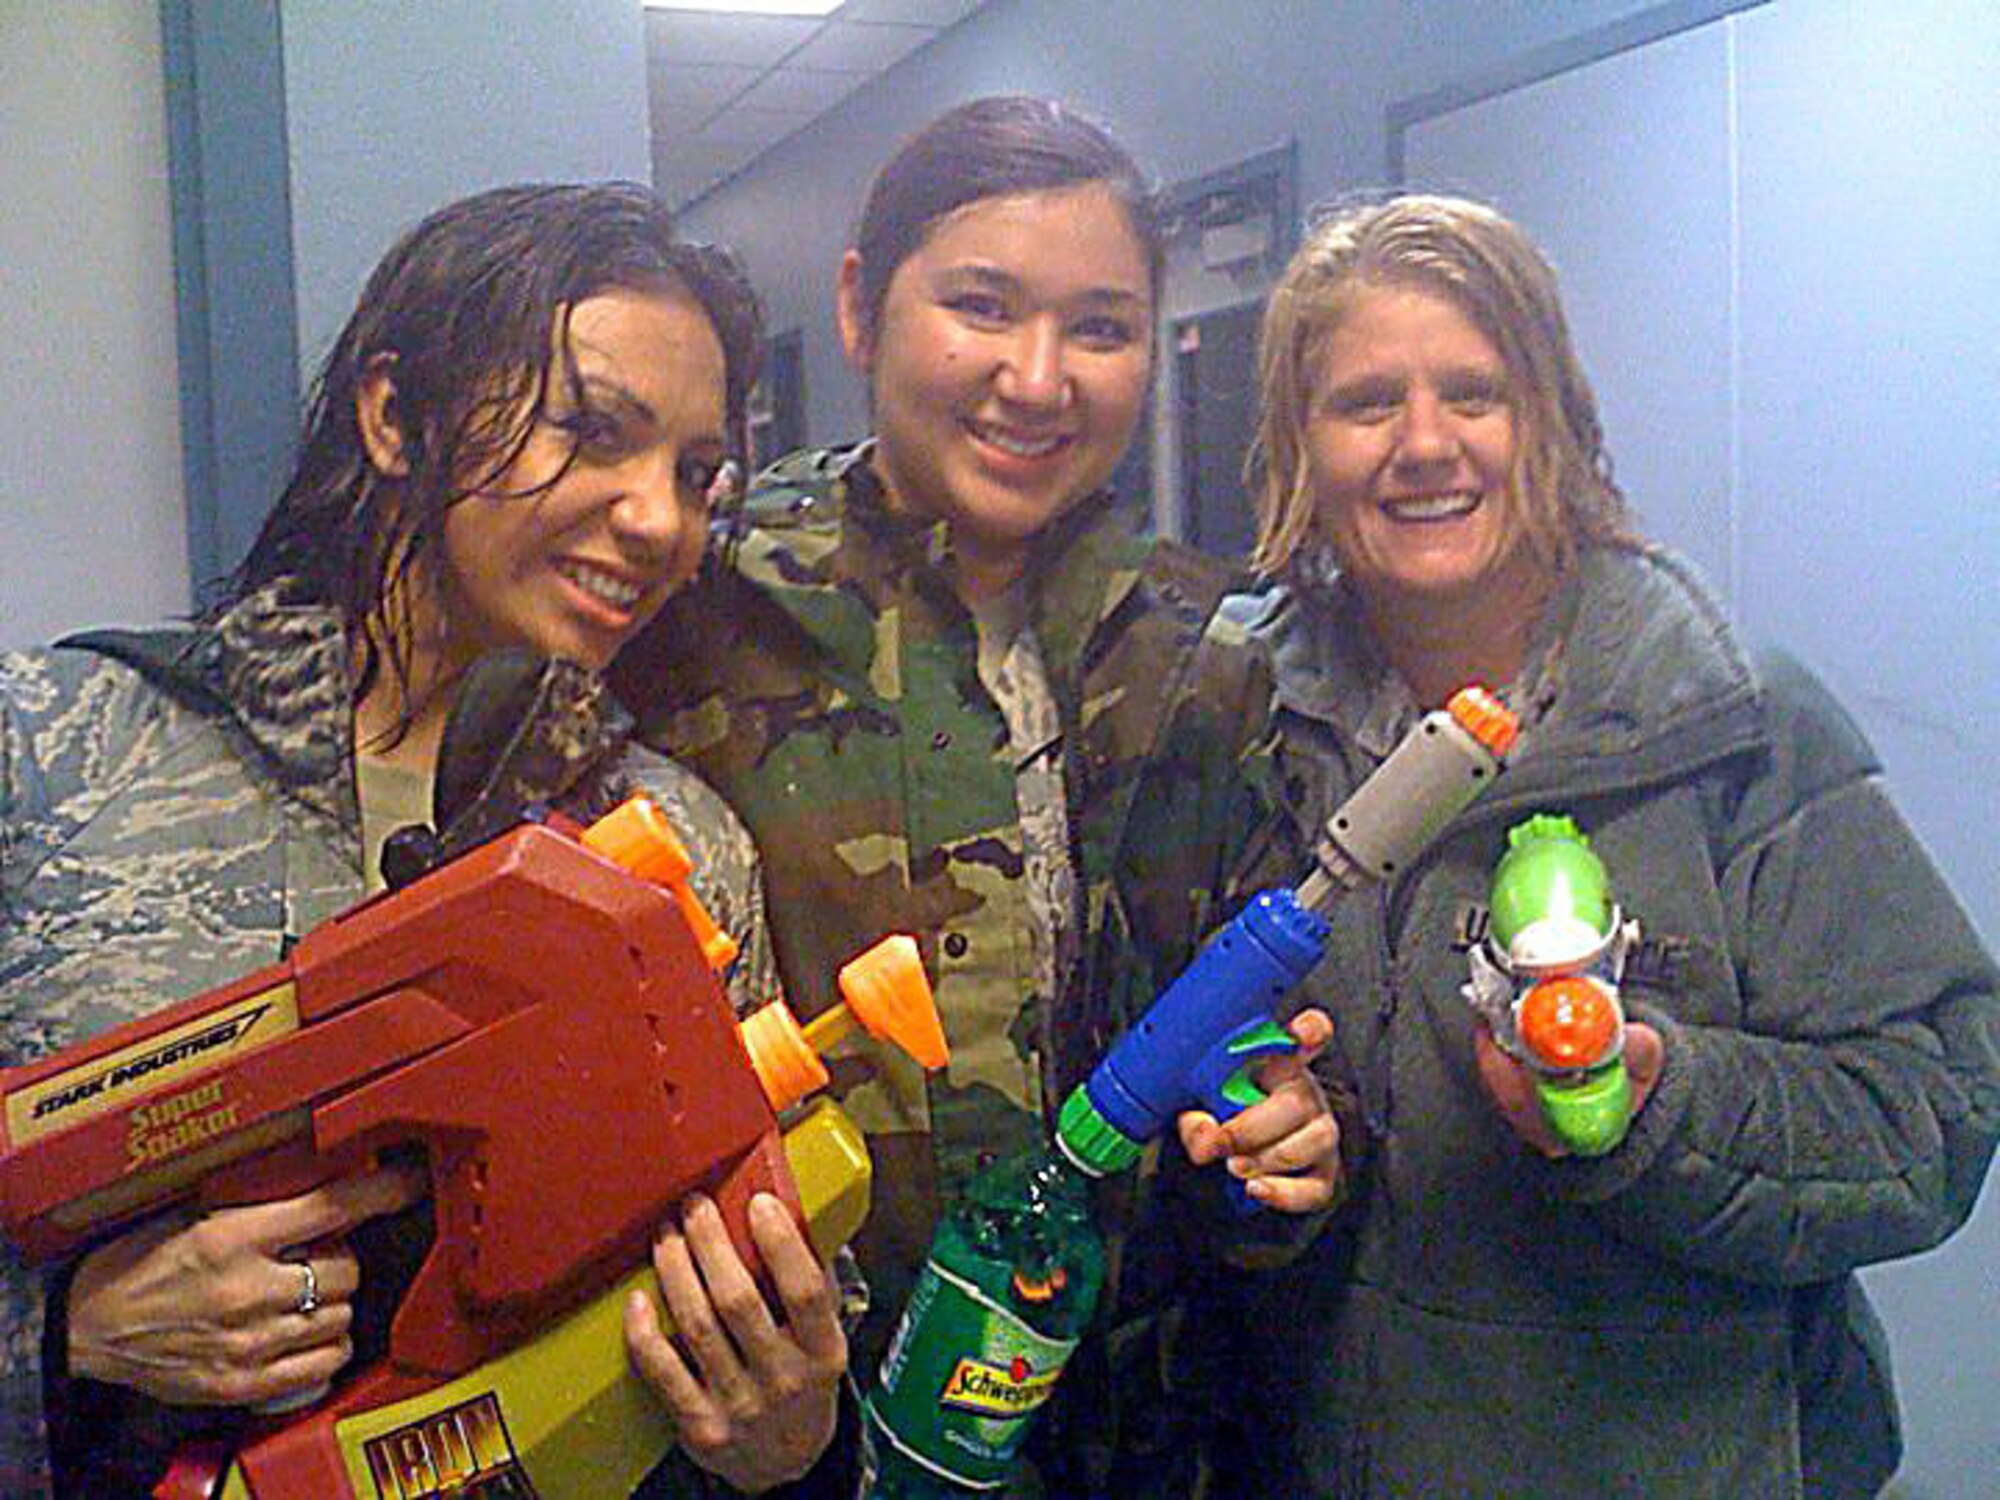 KULIS AIR NATIONAL GUARD BASE, Alaska -- 2nd. Lt. Vanessa Ortiz, 2nd Lt. Charity Mollison, and Lt. Col. Patty Wilbanks at the 176th Wing's final "Combat Dining In" at Kulis Air National Guard Base. Photographer unknown.